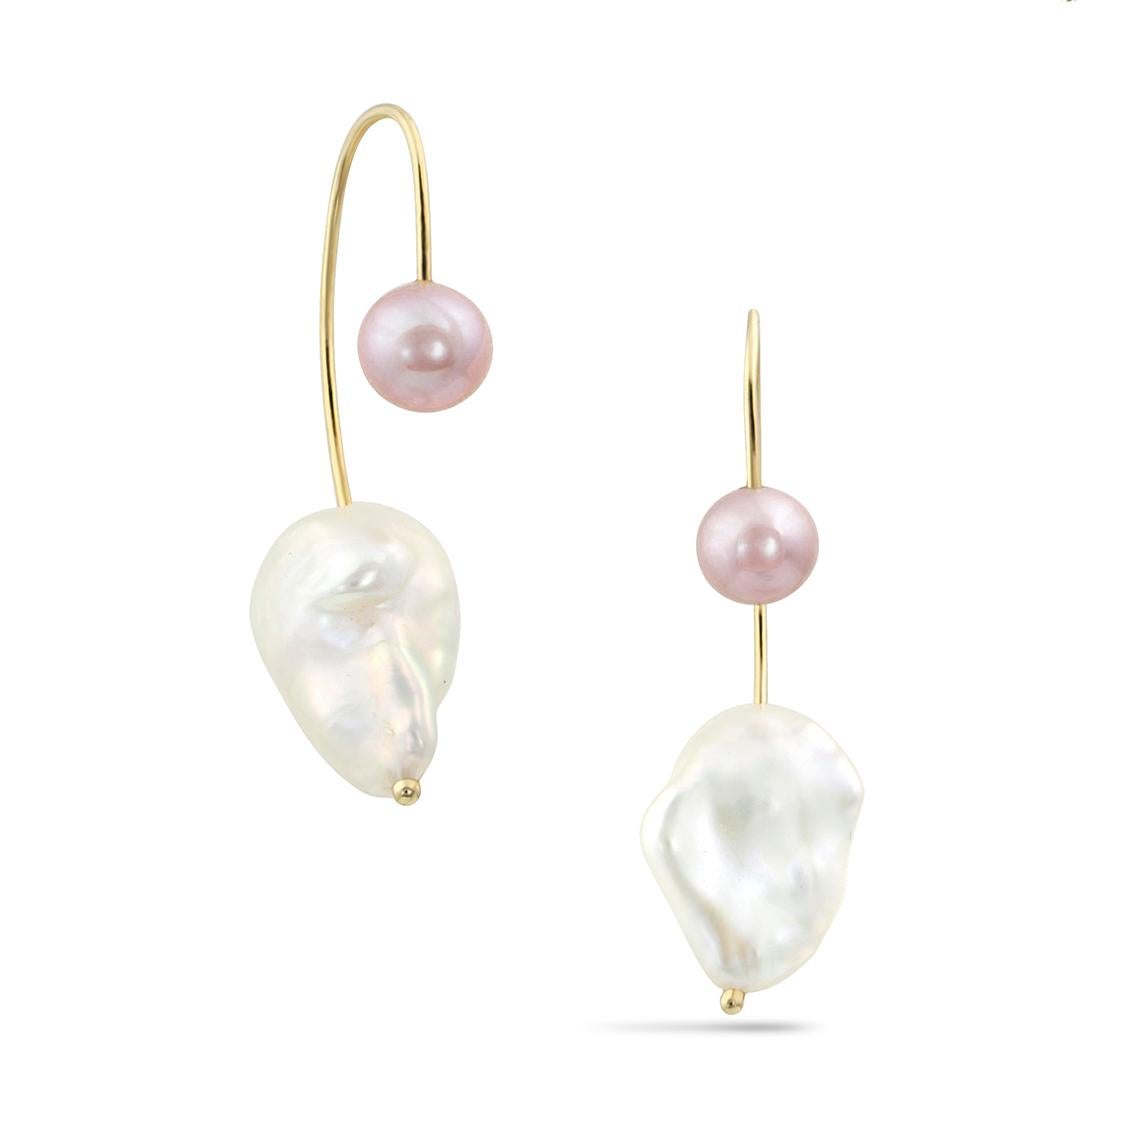 Elegantly carved by nature, a beautifully organic baroque pearl descends from behind the ear, suspended by a contrasting recycled solid gold curve and round pearl.  The classic round pearl plays beautifully against the baroque pearl, creating a